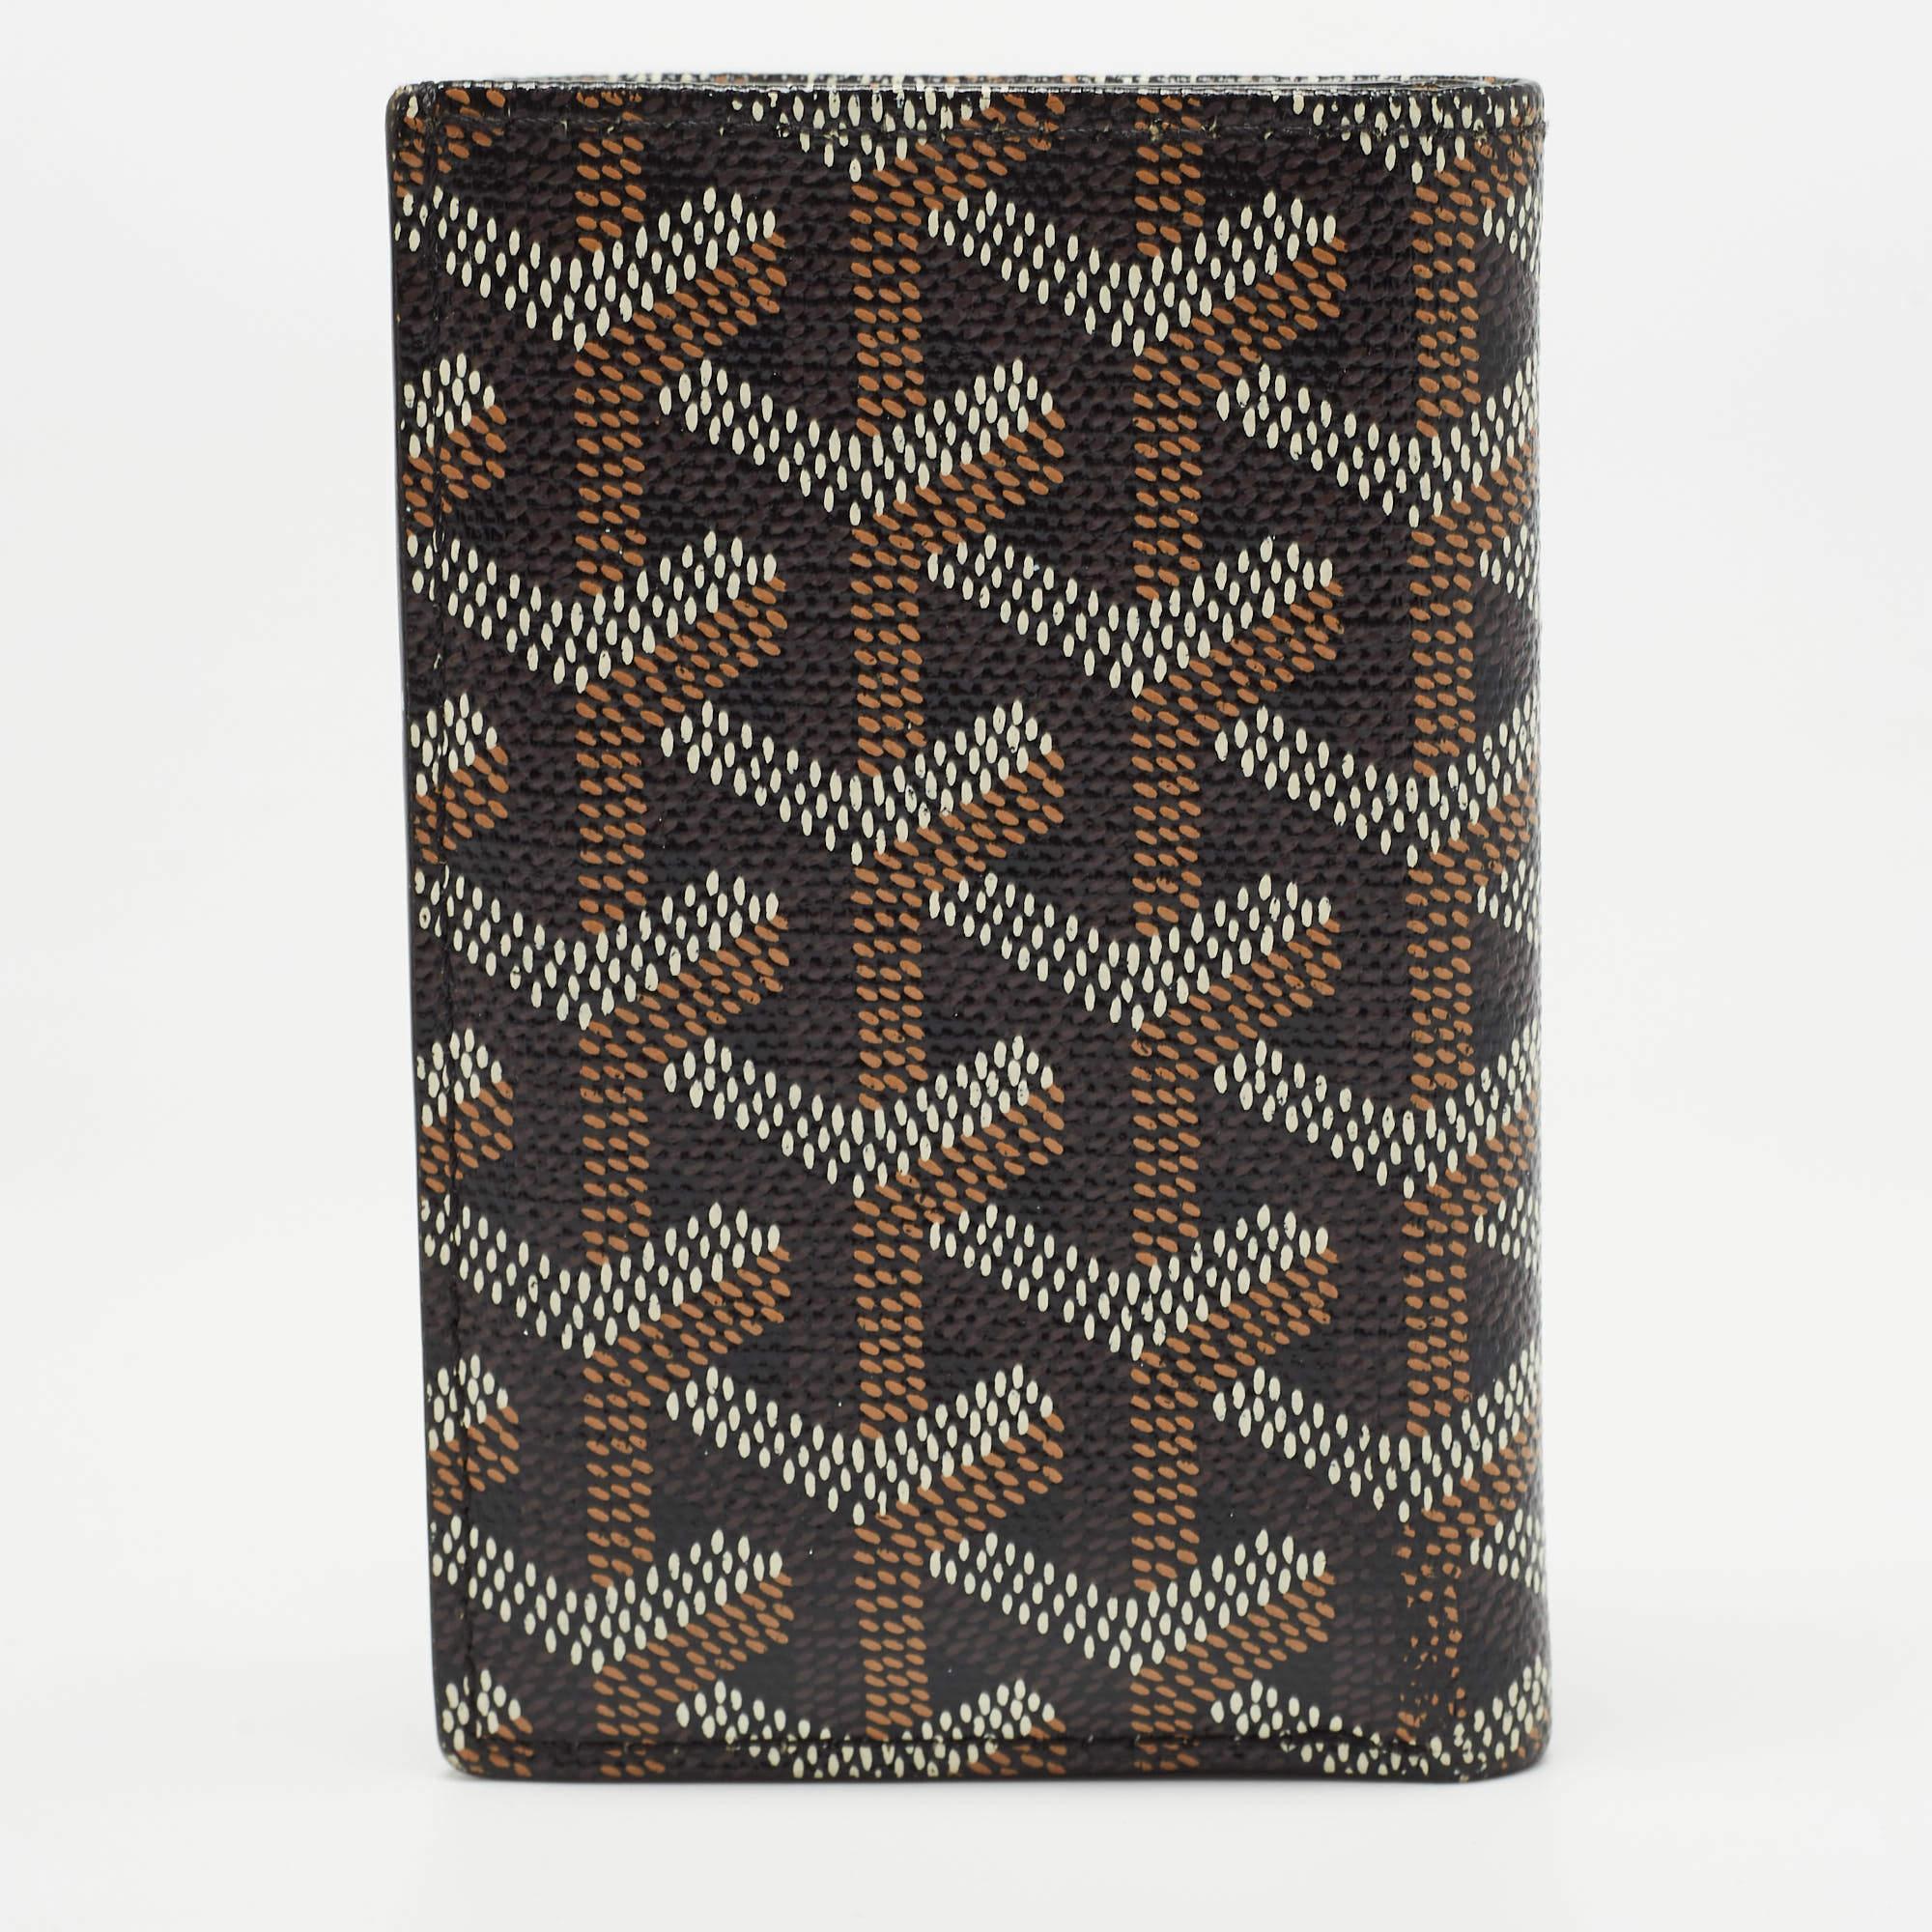 Functional and stylish, this Saint Pierre cardholder from Goyard should be your next buy. Crafted from signature Goyardine coated canvas, this brown cardholder features a bifold silhouette with multiple card slots lined in leather. It can be carried